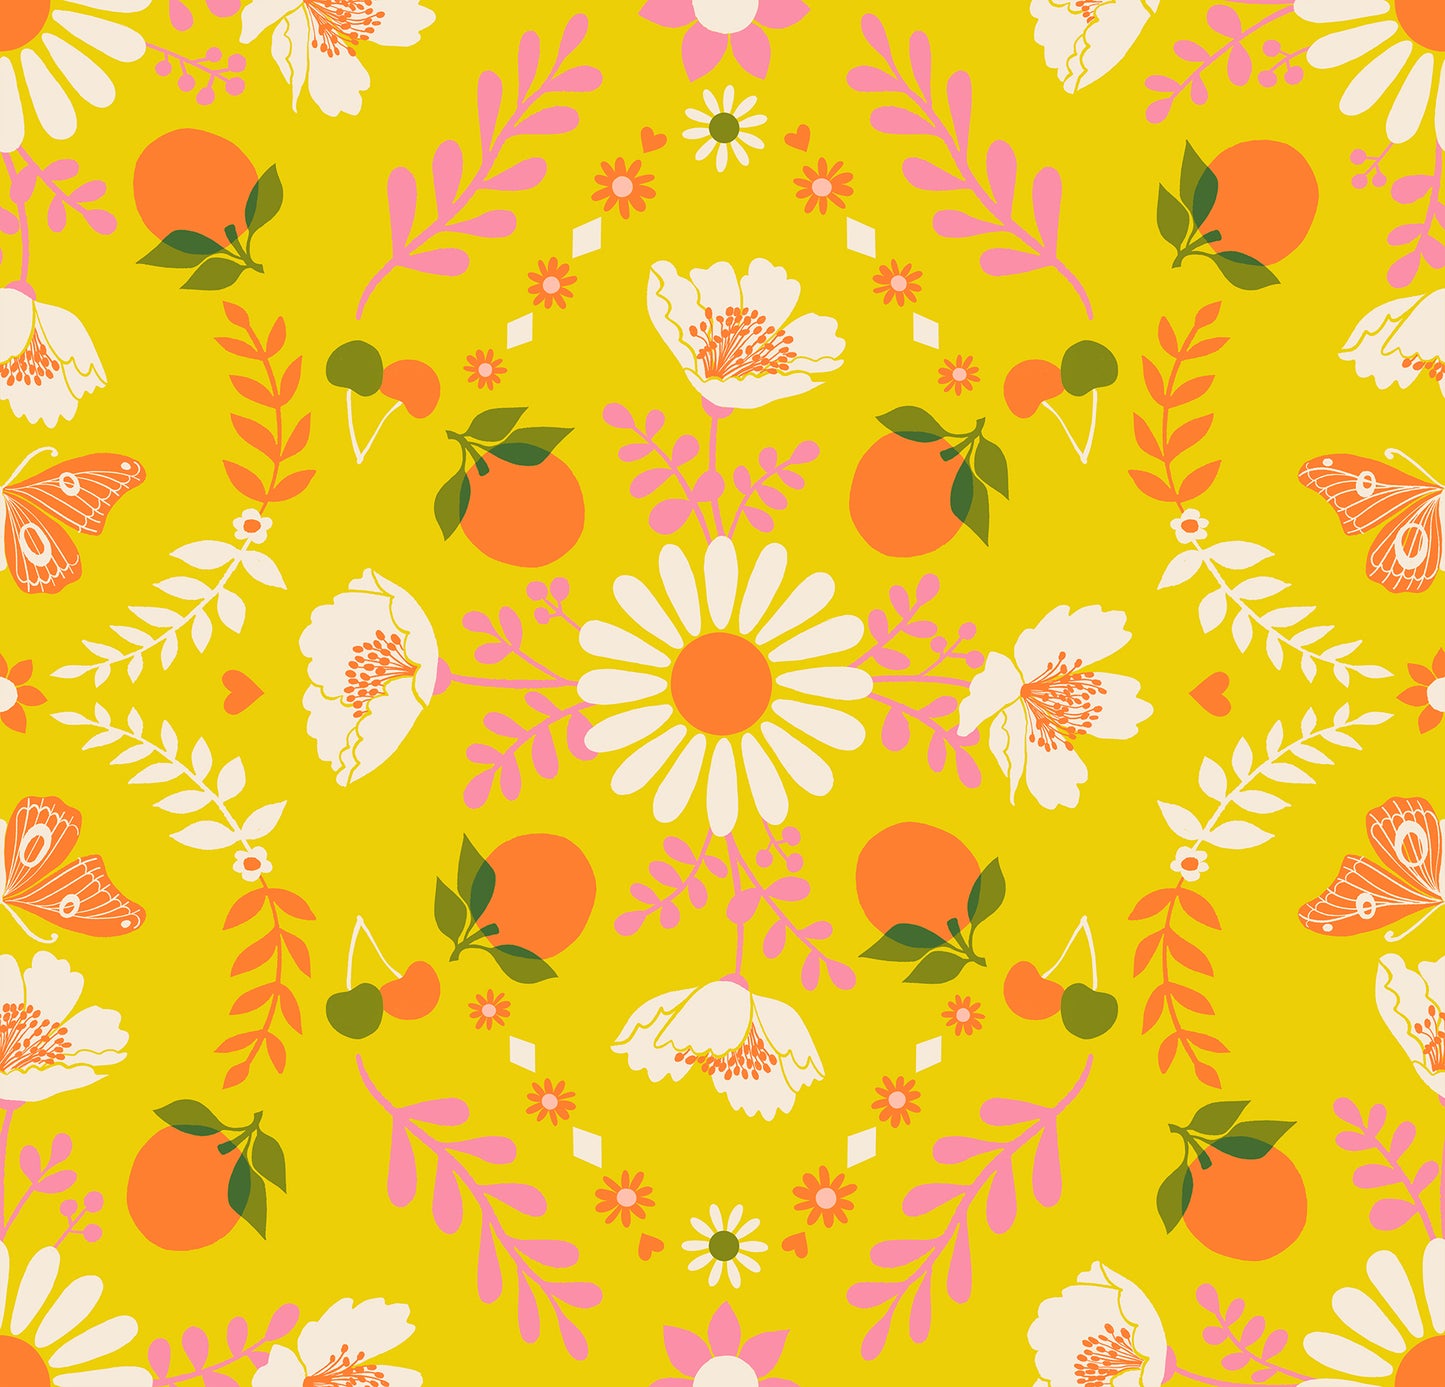 Juicy by Melody Miller - Poppy Garden Golden Hour RS0085 12